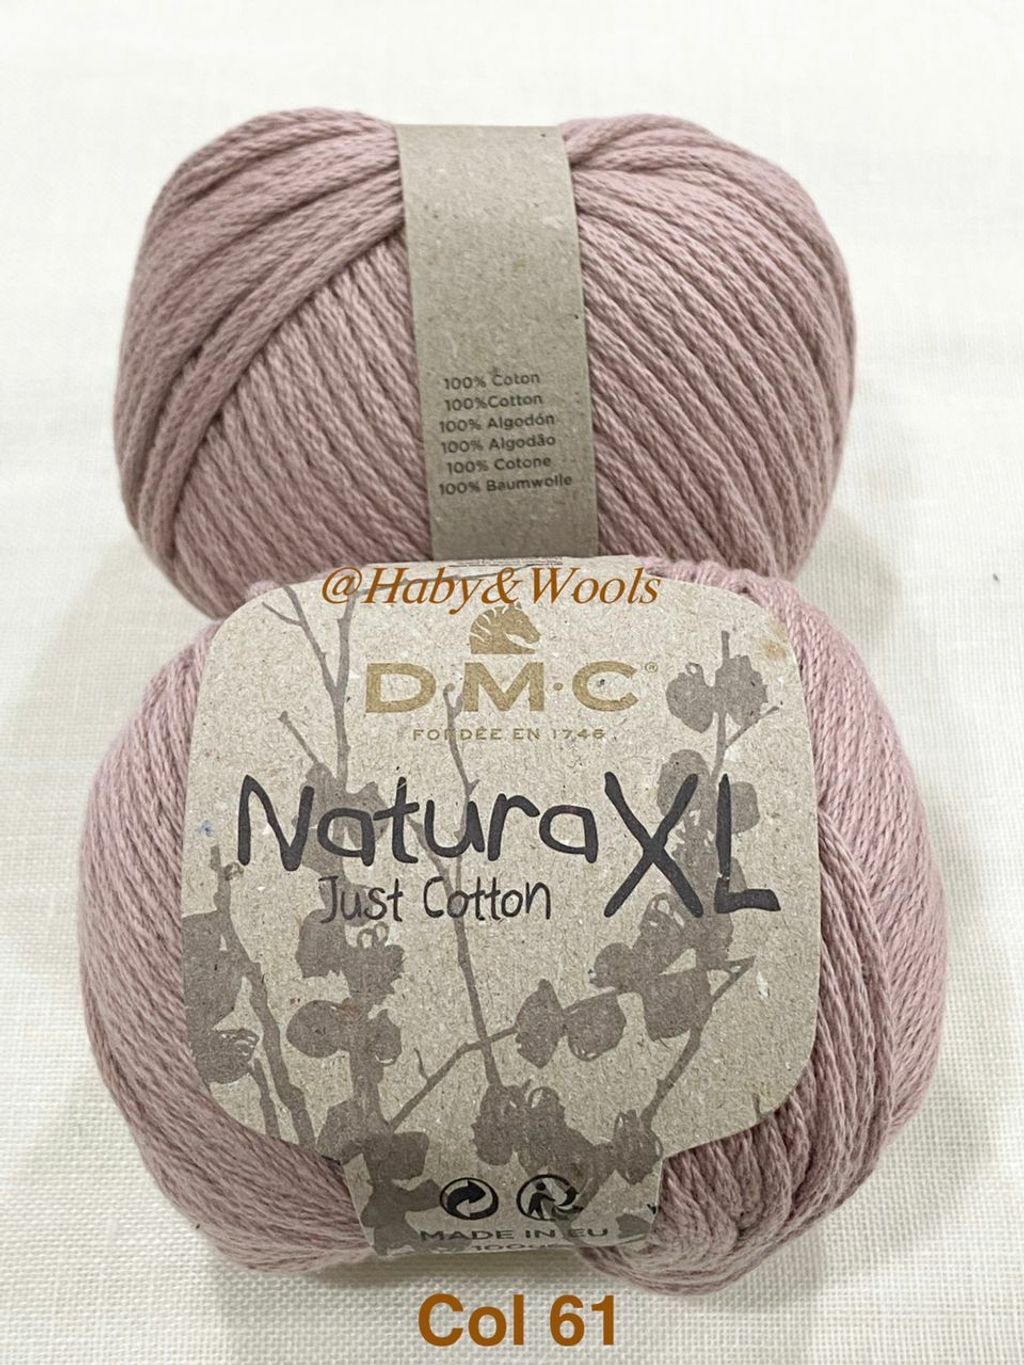 100% Pure Cotton #4 Yarn - Soft, Absorbent for Knitting, Crochet - 85yd —  Page 2 —